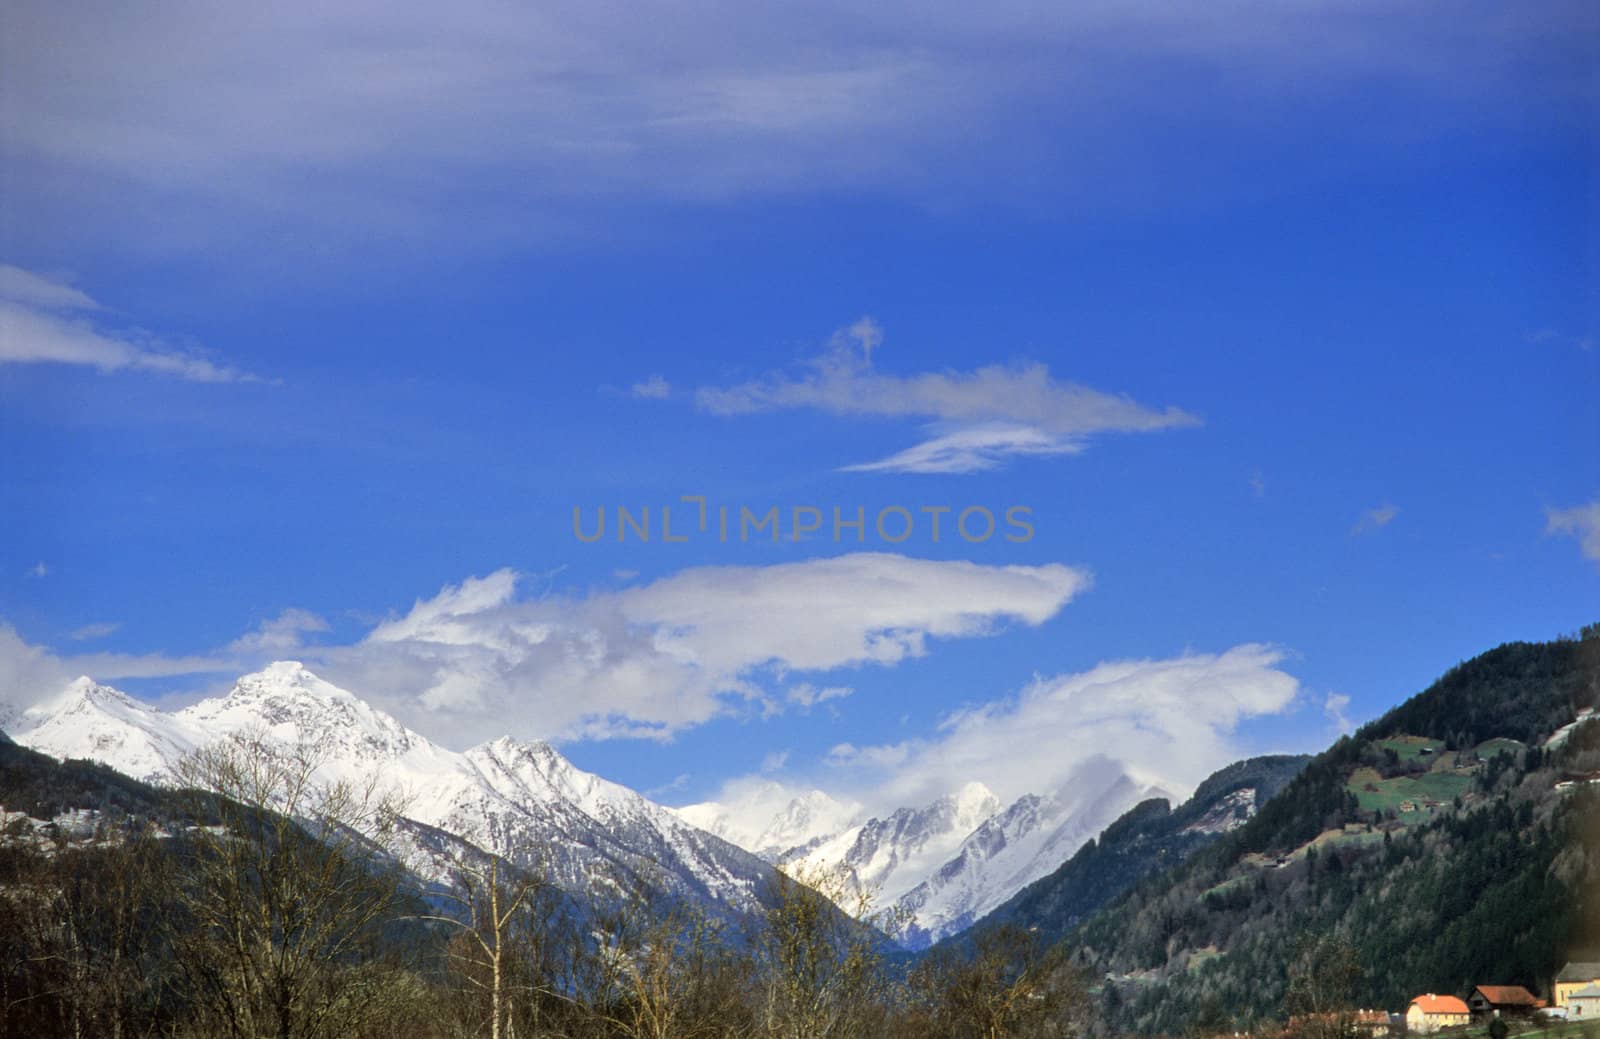 The snowy peaks of the Alps against a bright blue sky.